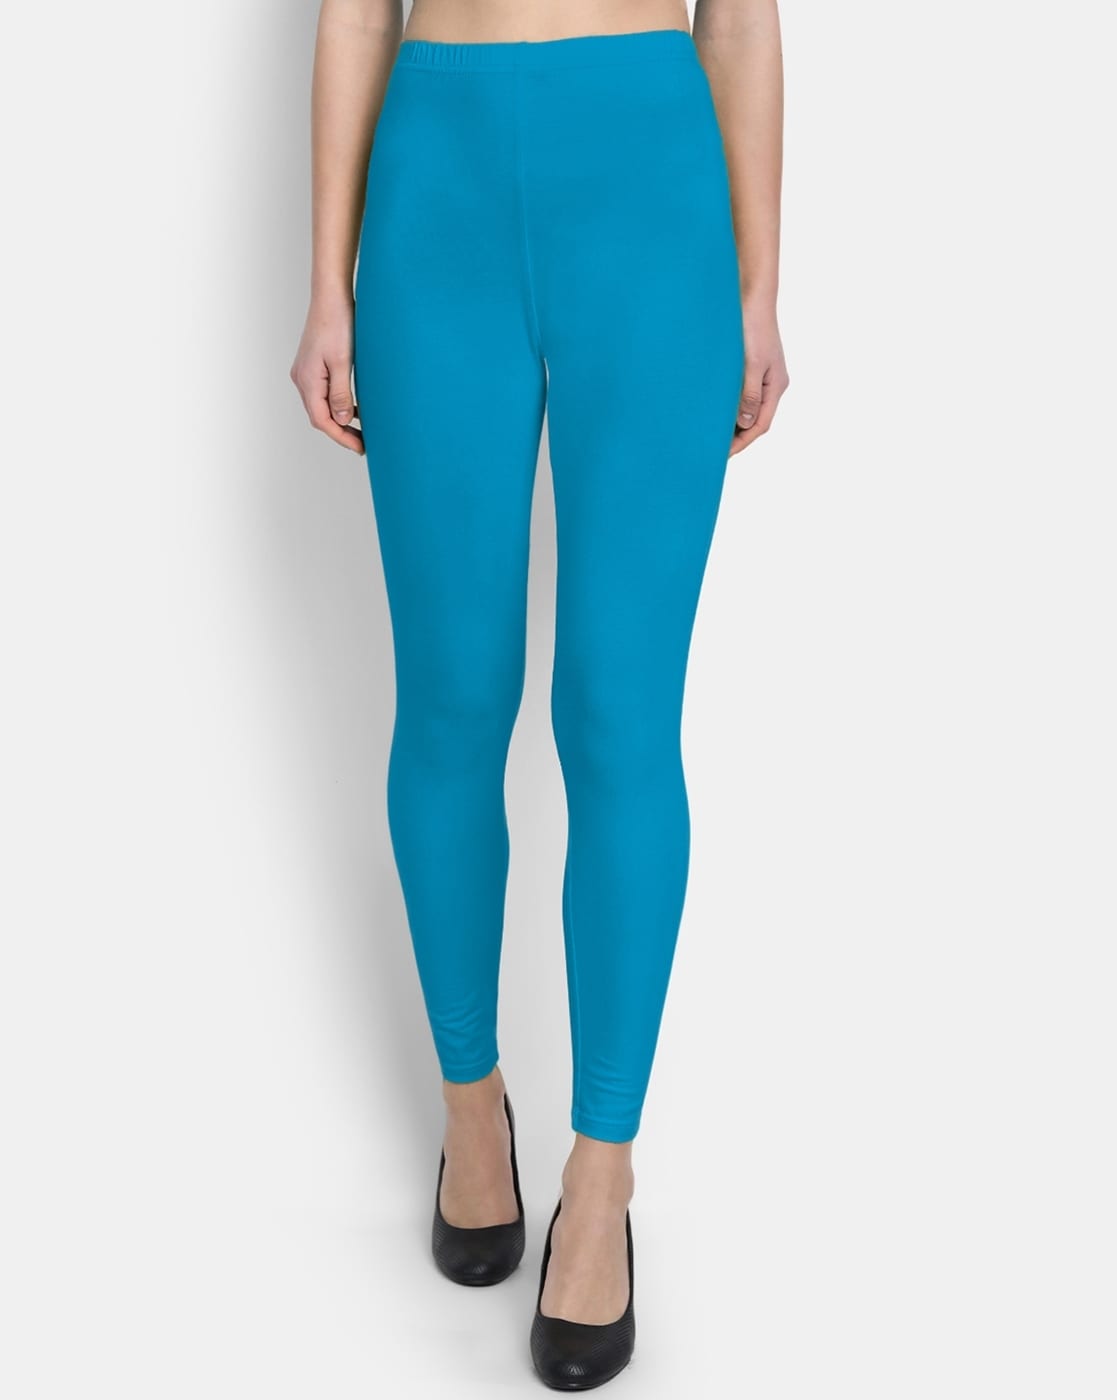 Buy Turquoise Leggings for Women by Soft Colors Online | Ajio.com